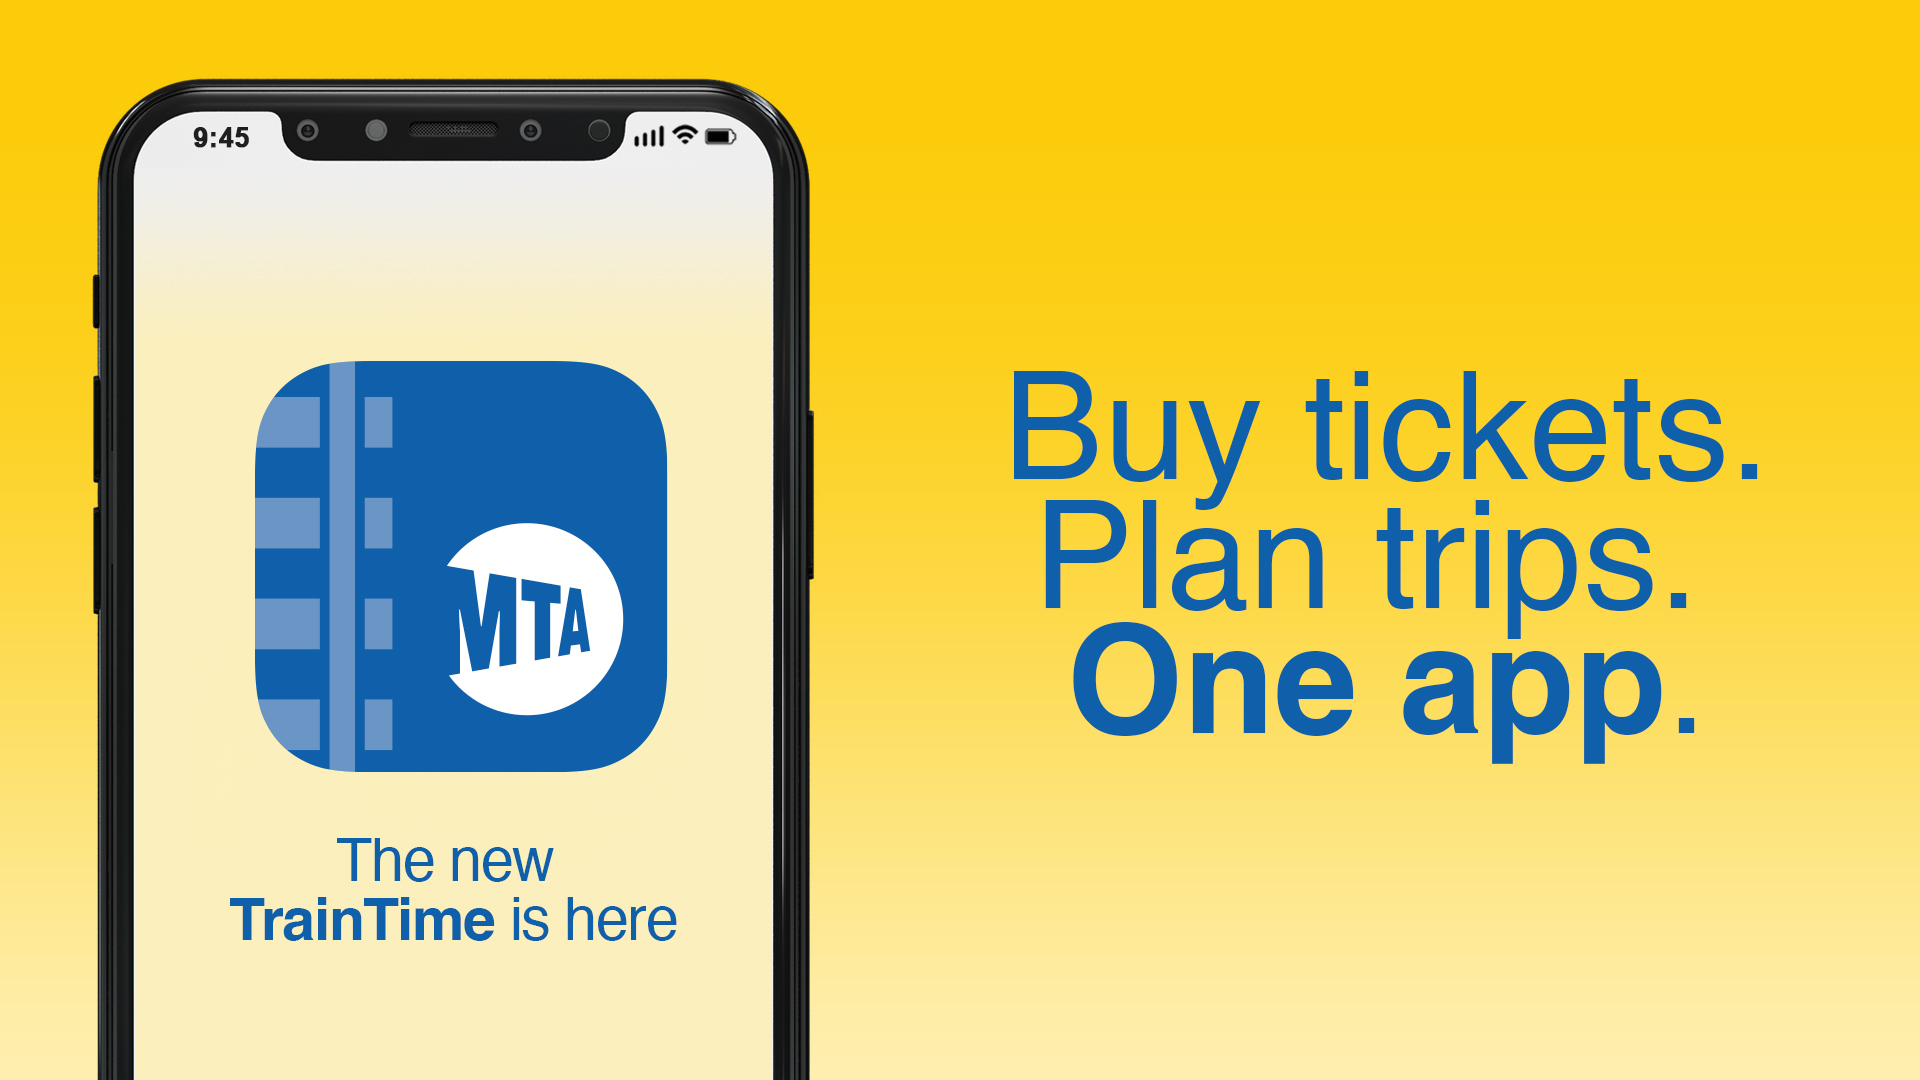 The new TrainTime app is here!